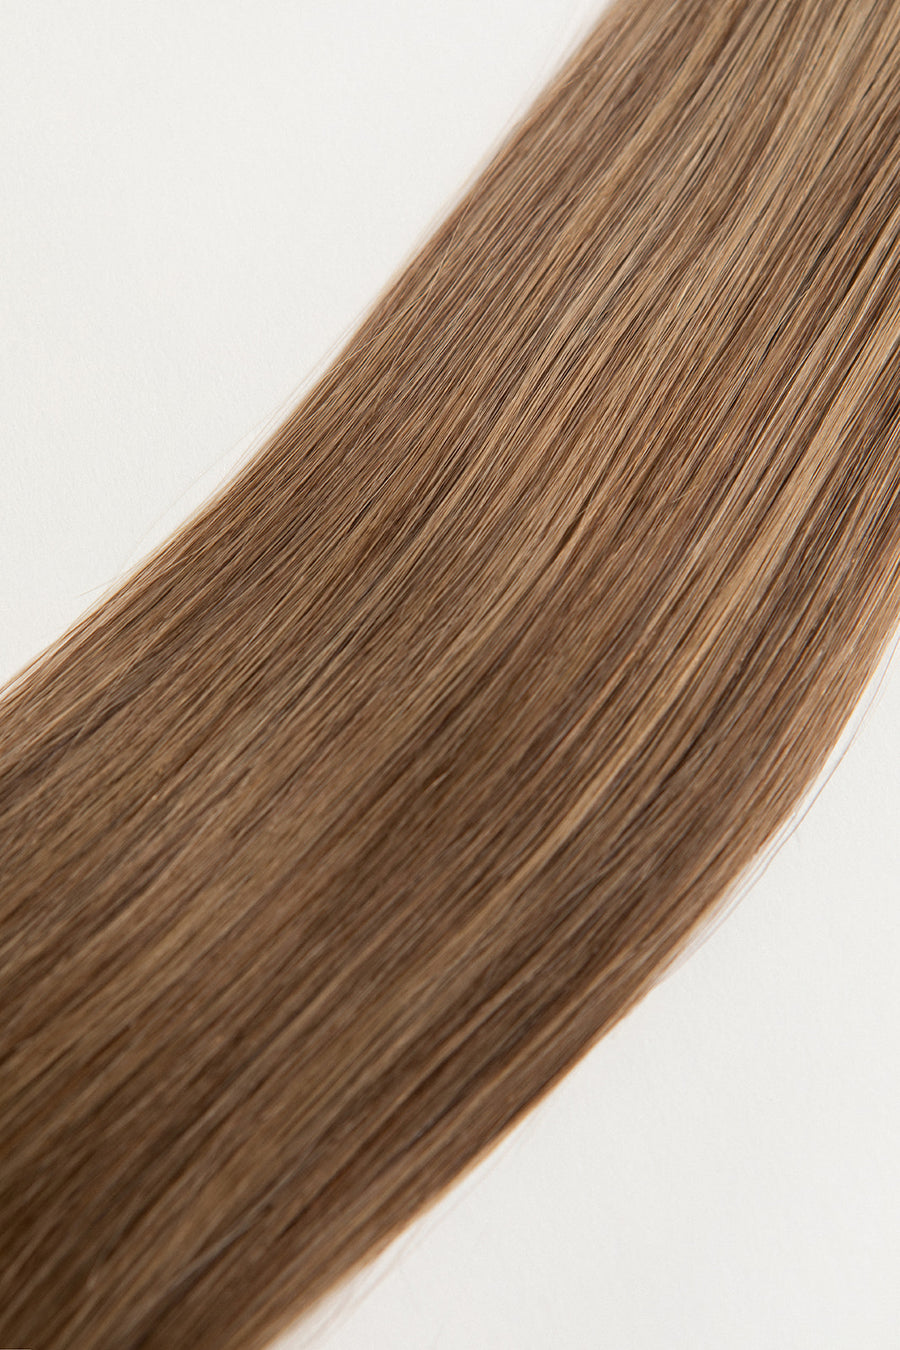 Spiced Suede is our flawless balayage brunette blend. Stylist lingo: Natural rooted level 6 blended into natural/gold dimensional levels 6 & 9 Hidden Harloc Clip-In Extensions are made from ethically sourced, Remy Slavic hair. They come with 5 seamless silicone wefts to ensure an undetectable result that is comfortable to wear. Whether you are looking to add volume or length, a stunning look for a special event, or just want to look and feel gorgeous. Available in 10 of our beautiful shades.